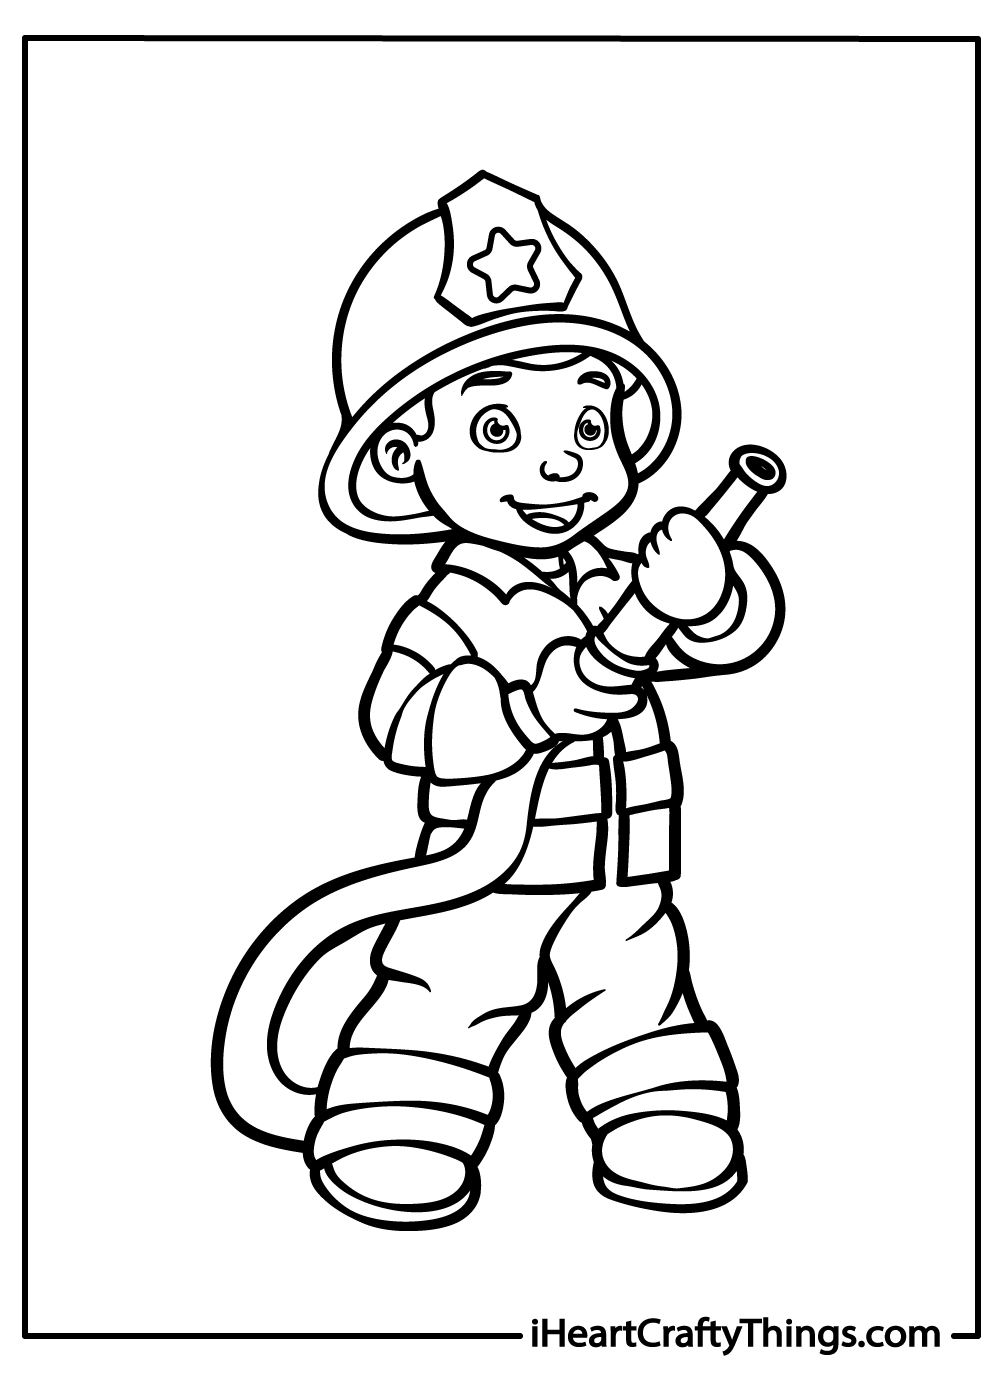 original fire department coloring pages